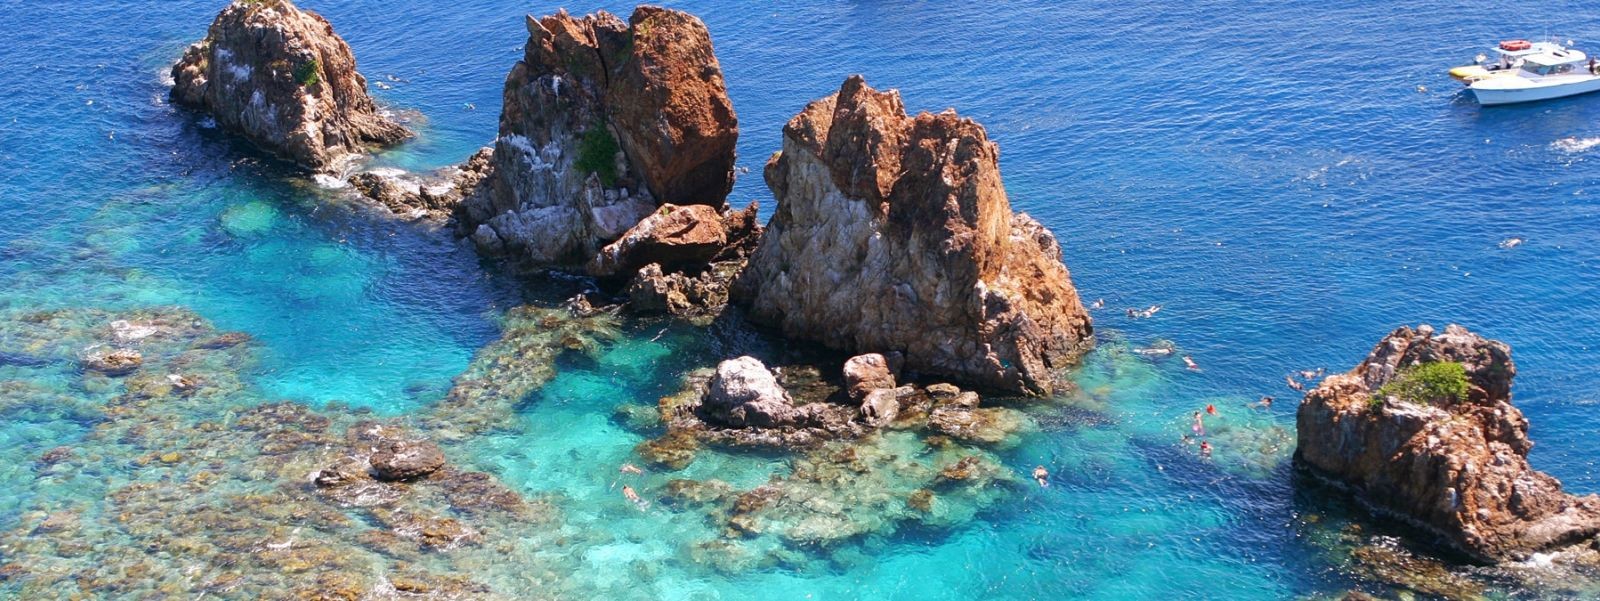 Impressive rock formations and coral reefs